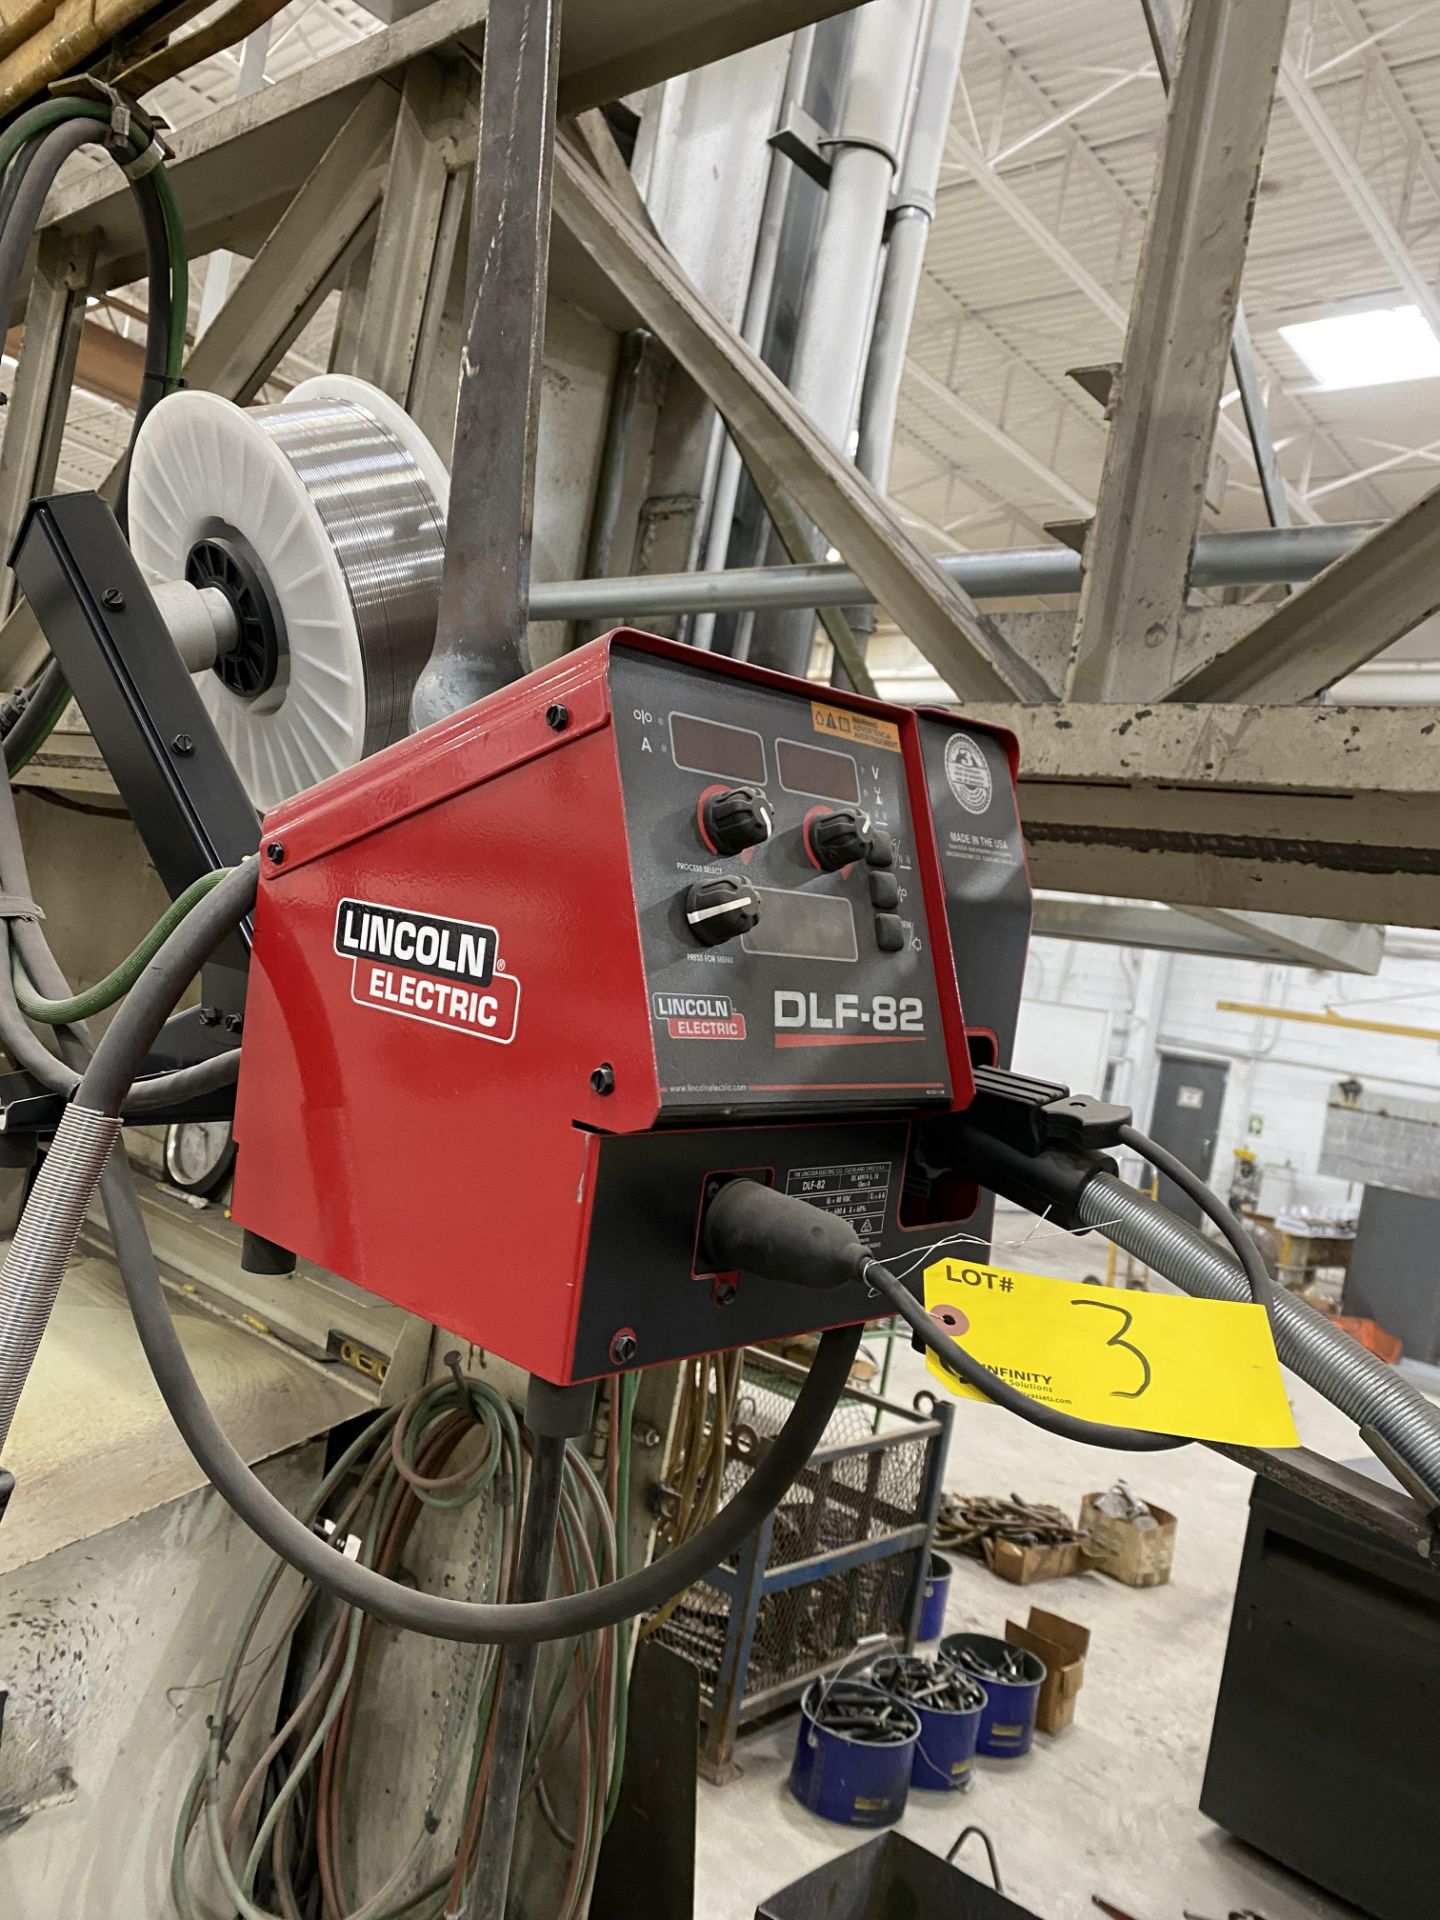 LINCOLN ELECTRIC FLEXTEC 650X MIG WELDER W/ LINCOLN ELECTRIC DLF-82 WIRE FEEDER, CABLES, STAND - Image 3 of 4